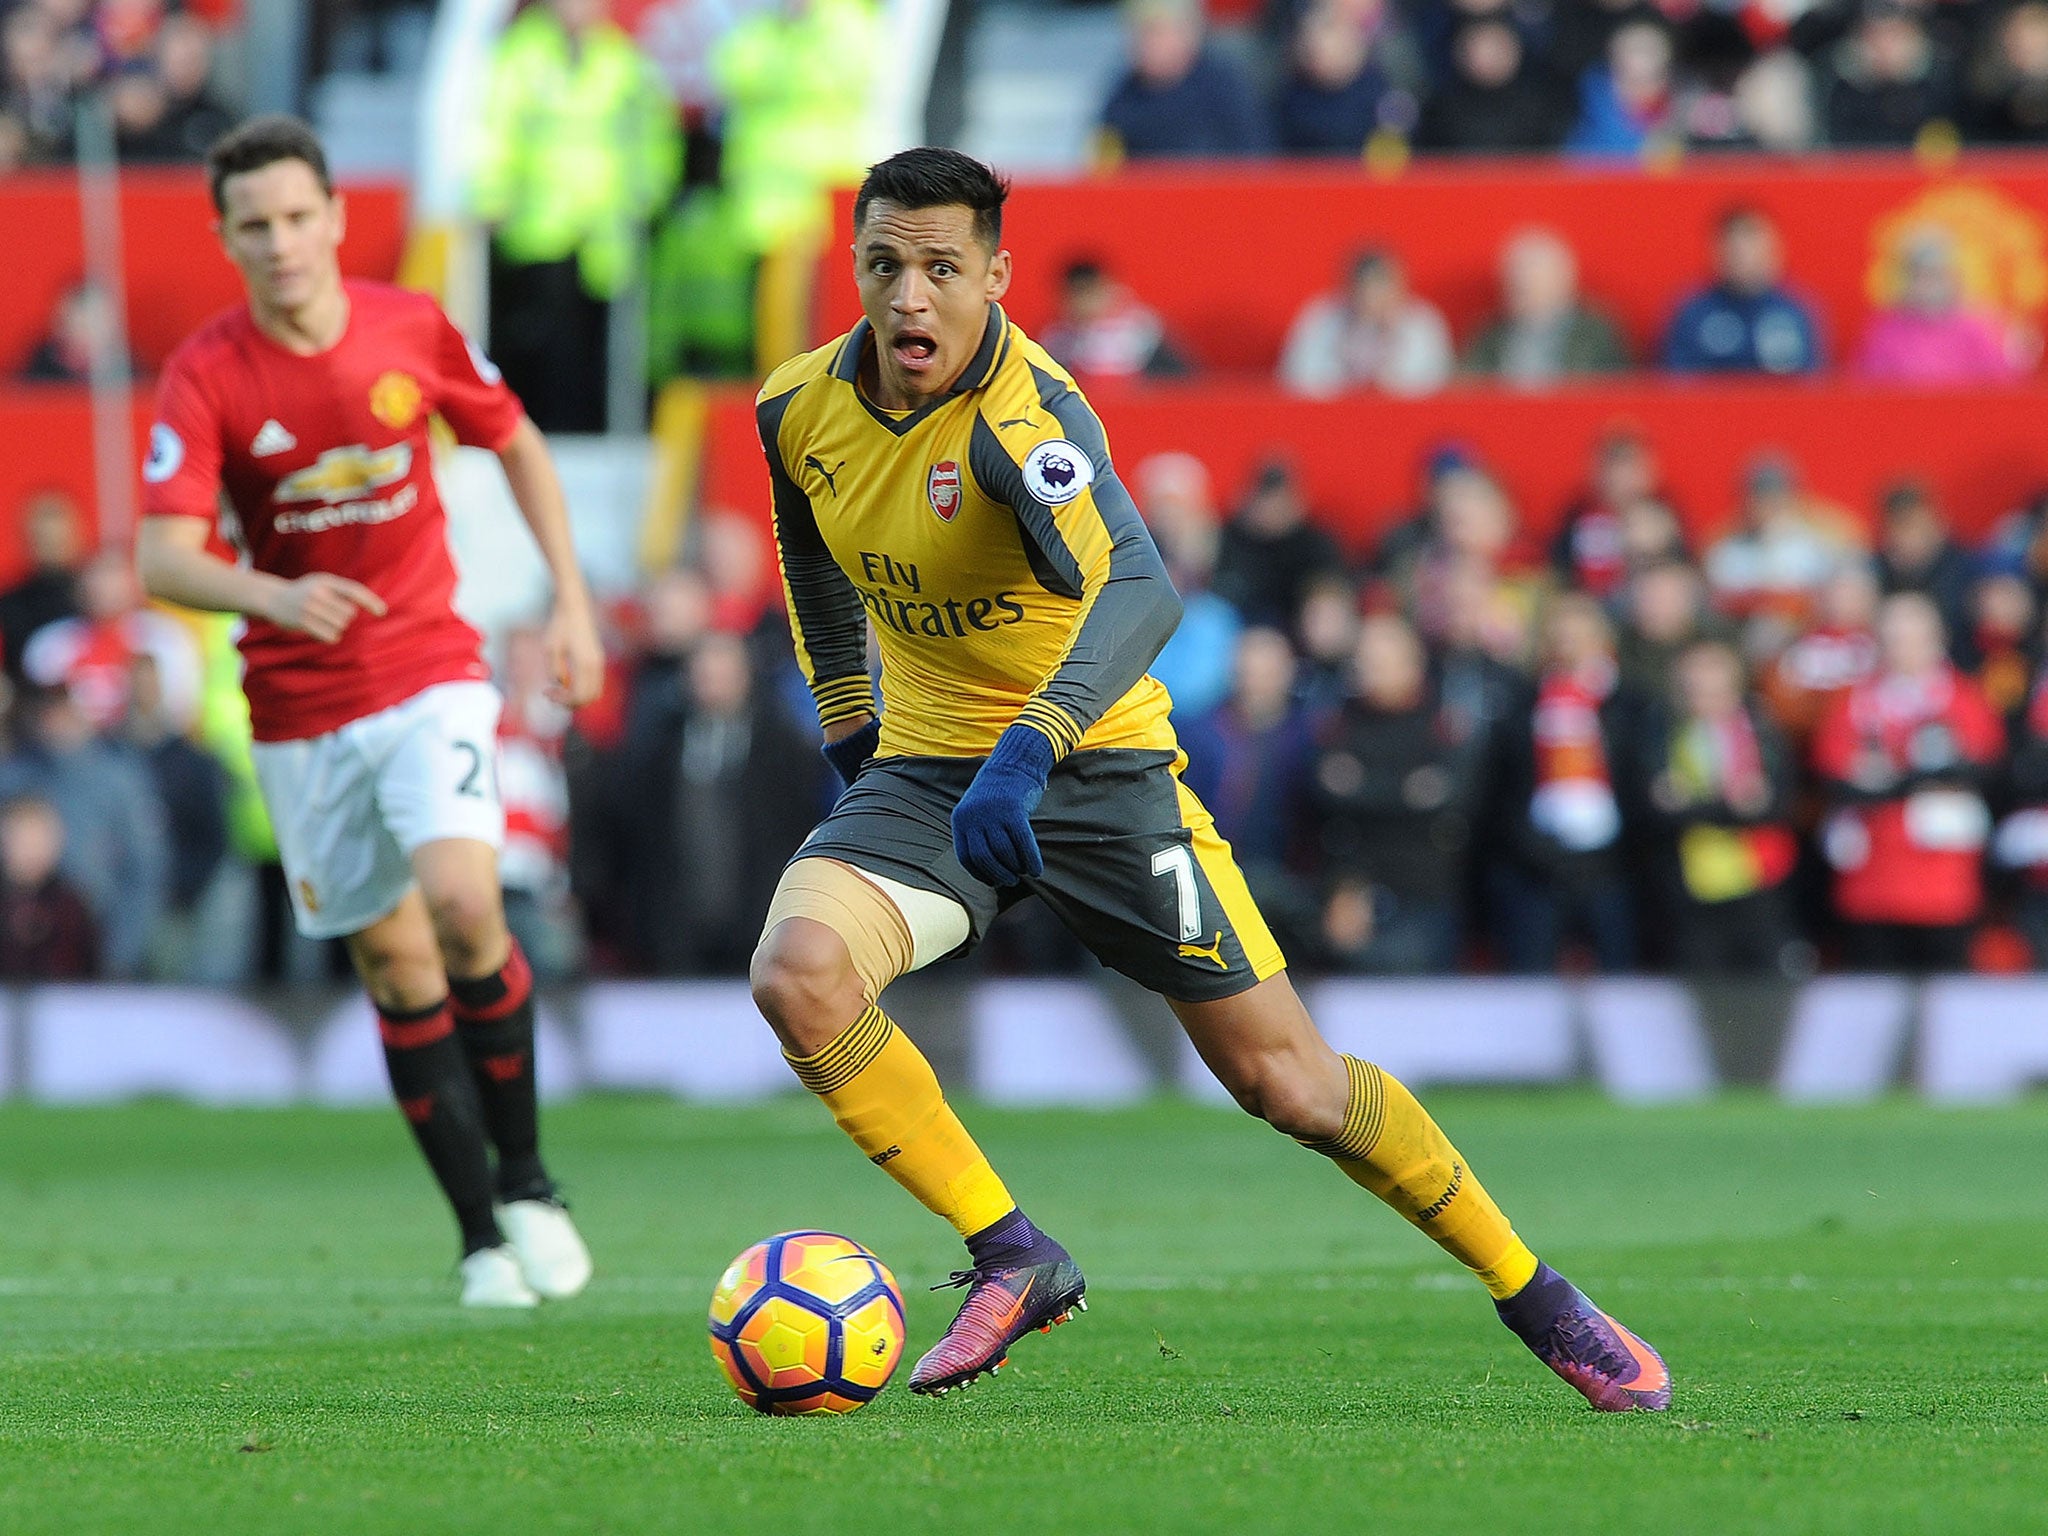 Alexis Sanchez will be rested by Arsene Wenger in the coming weeks in an effort to avoid injury